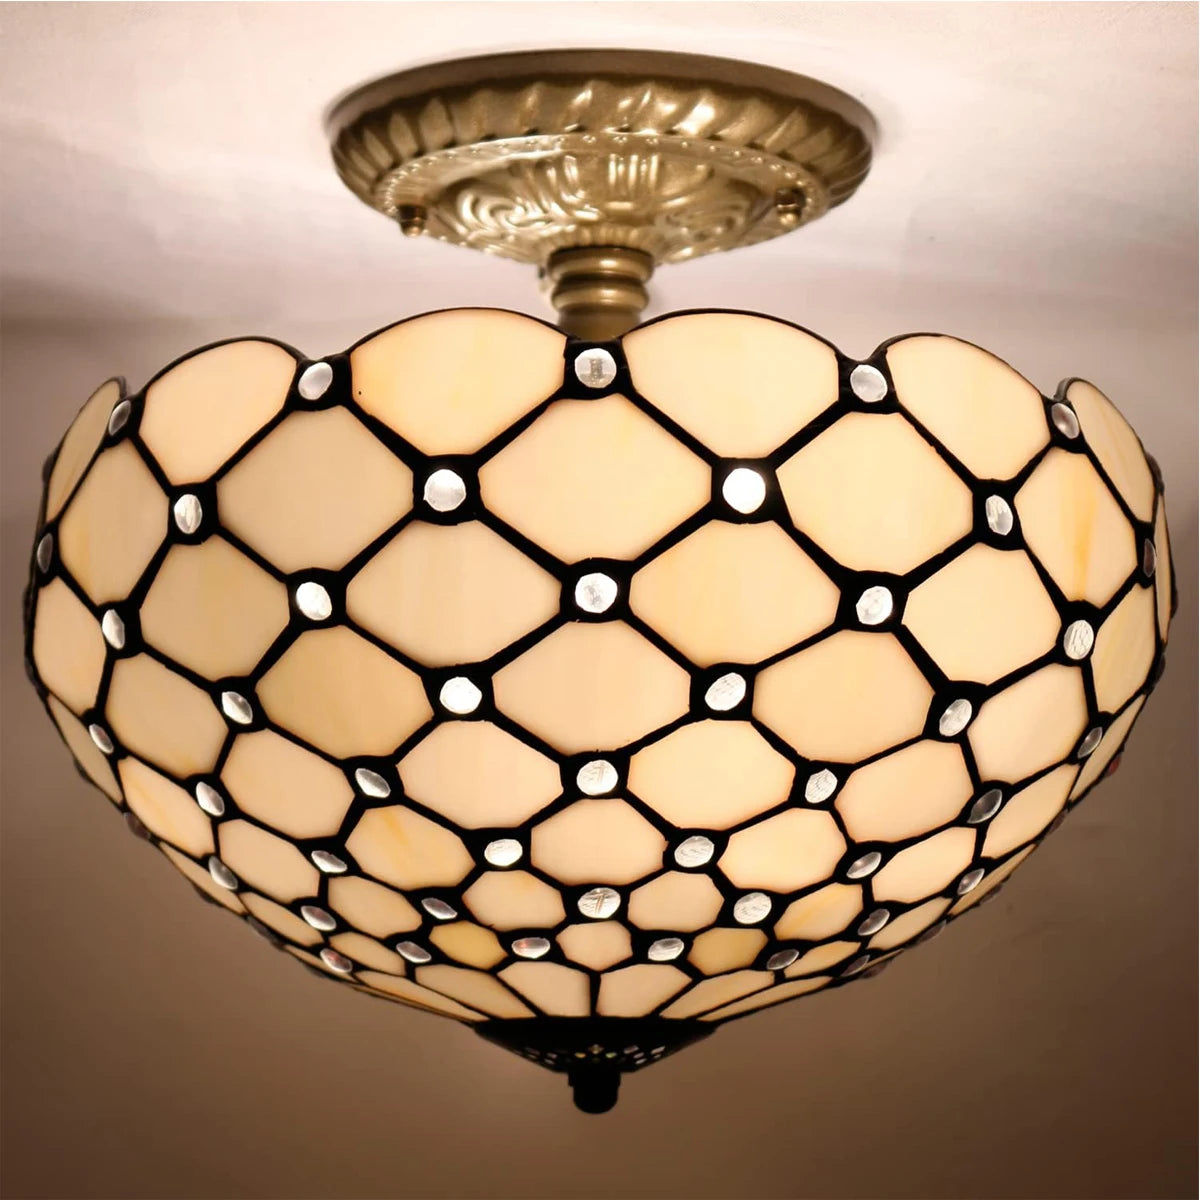 Tiffany Ceiling Light Fixture Cream Amber Stained Glass